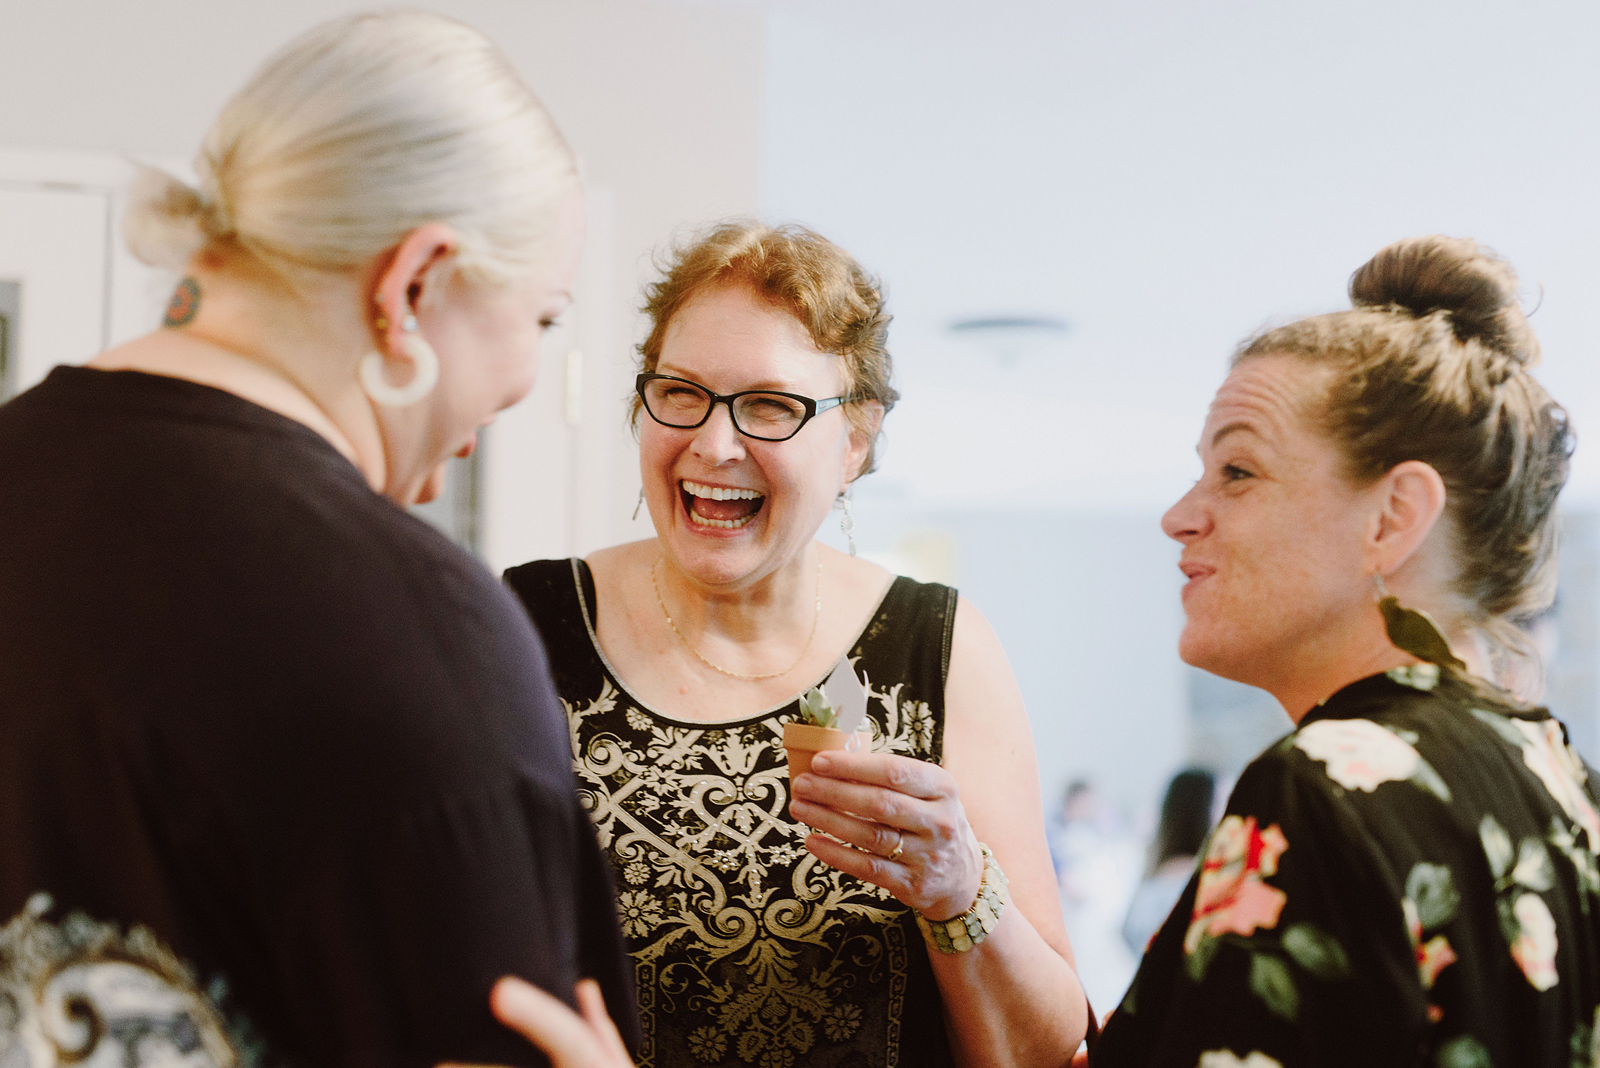 Candid photo of guests laughing at the afterparty - Oaks Pioneer Church Wedding